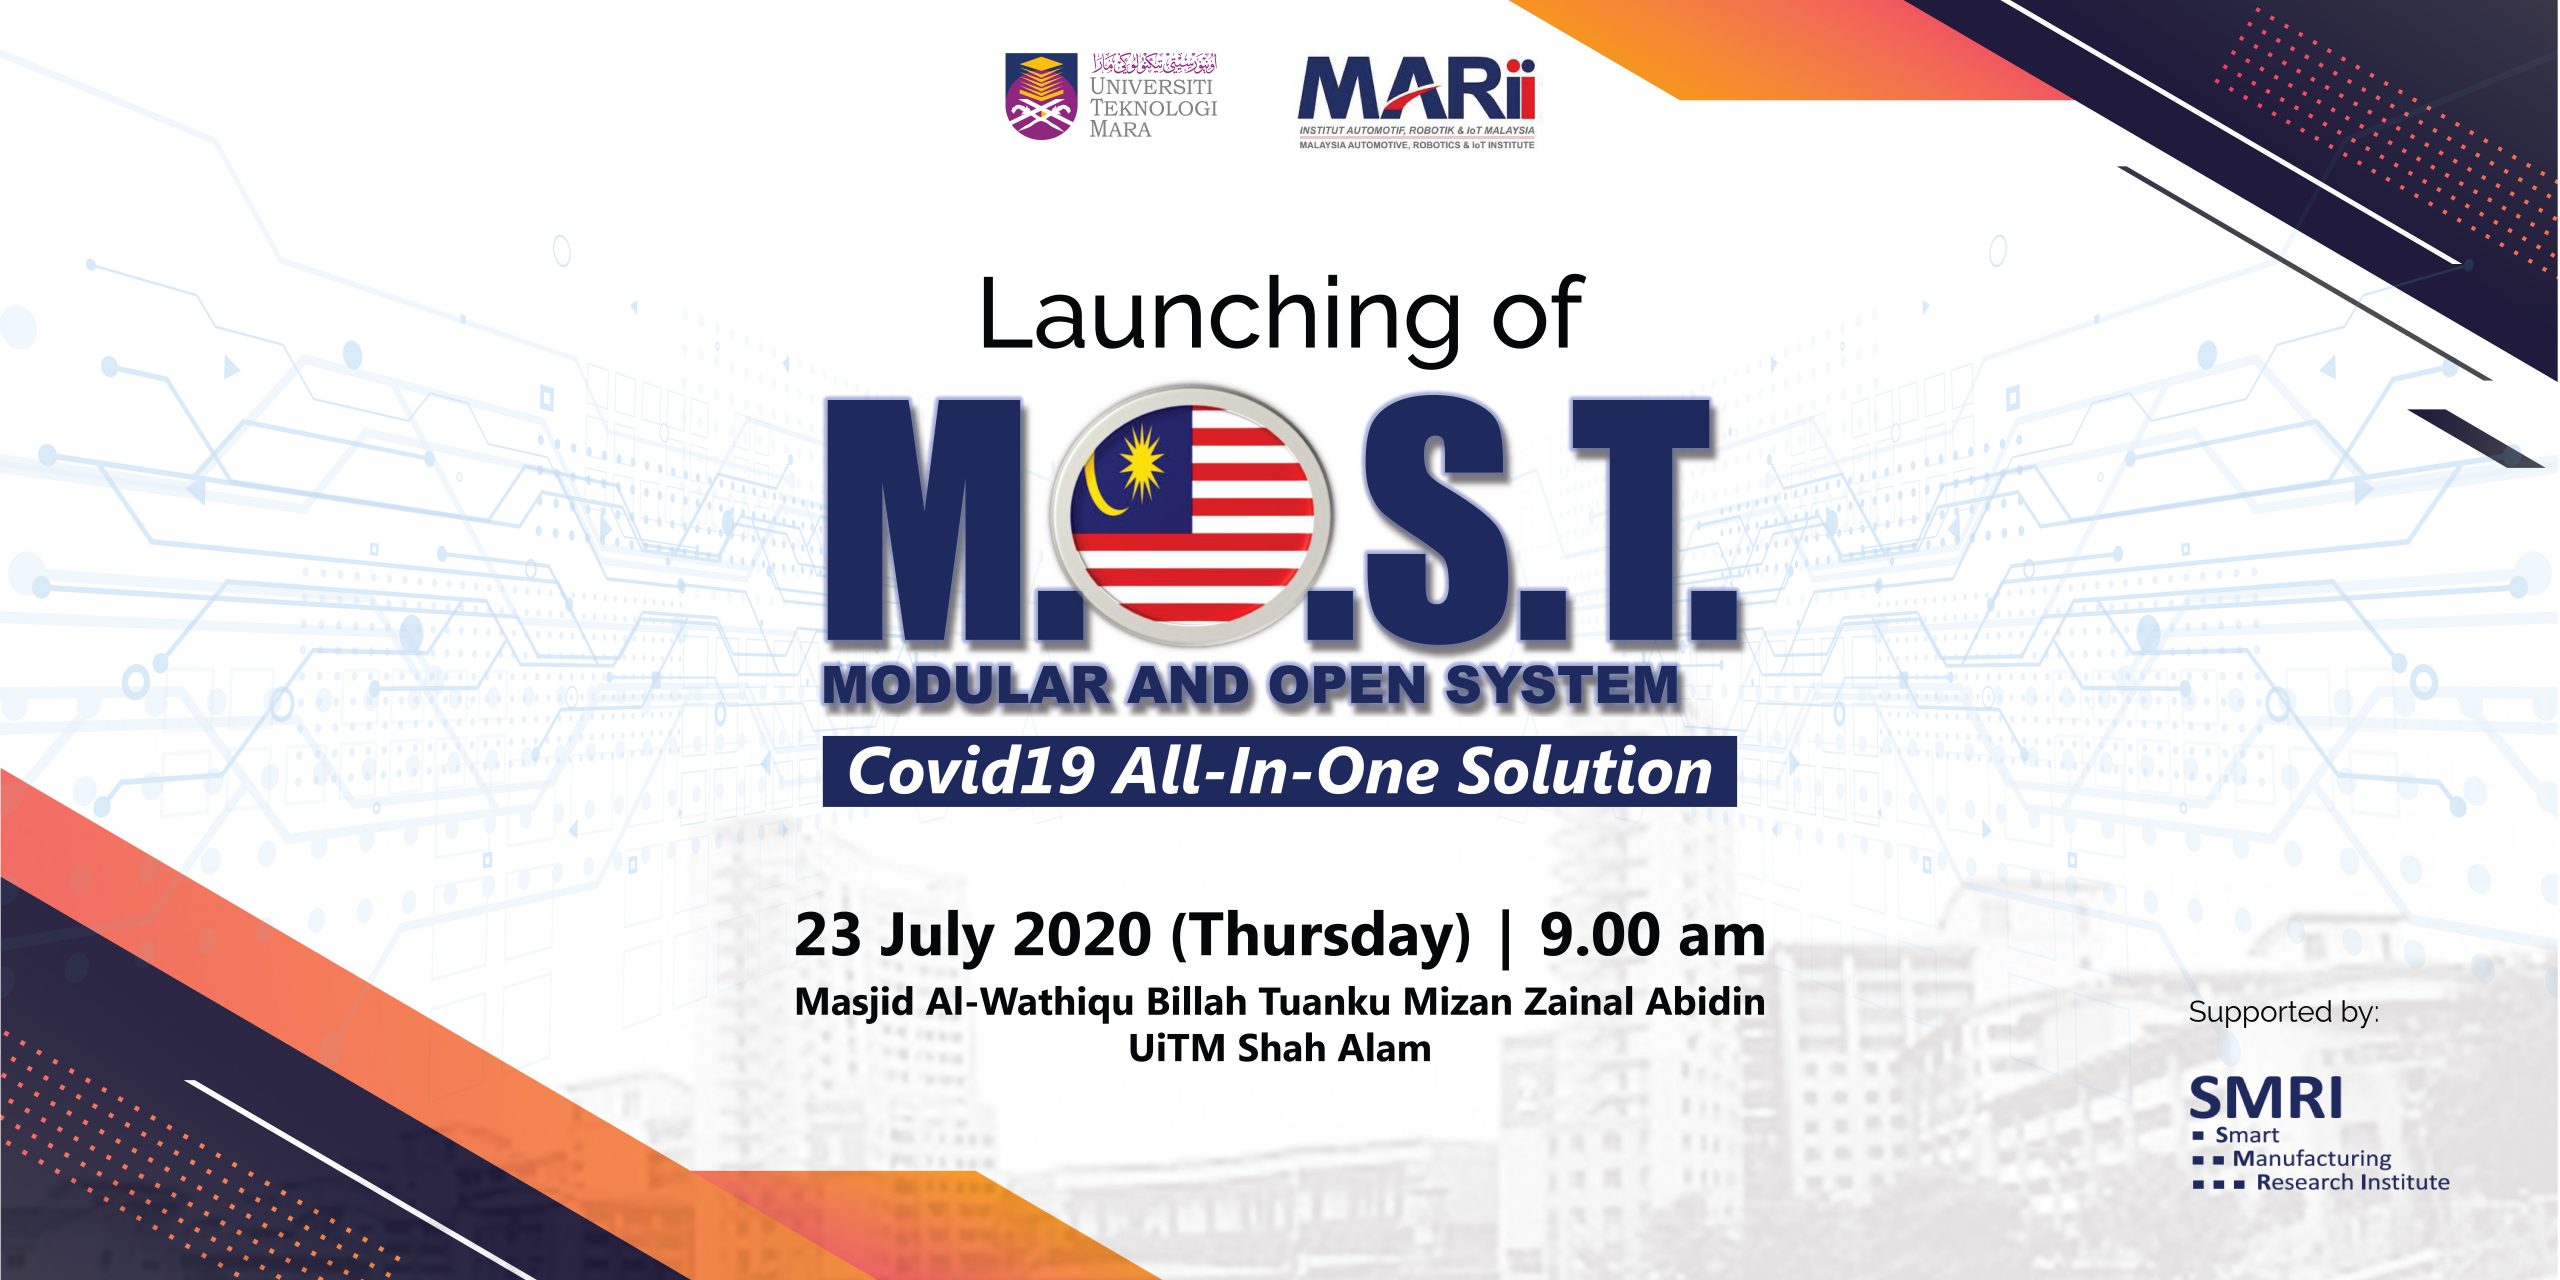 Launching Ceremony of Smart Manufacturing Research Institute (SMRI) Product Series: “MOST- Plus ” Modular Open System COVID-19 All-In-One Solution & Launching of Commercialisation Products with Malaysia Automotive, Robotics and IOT Institute